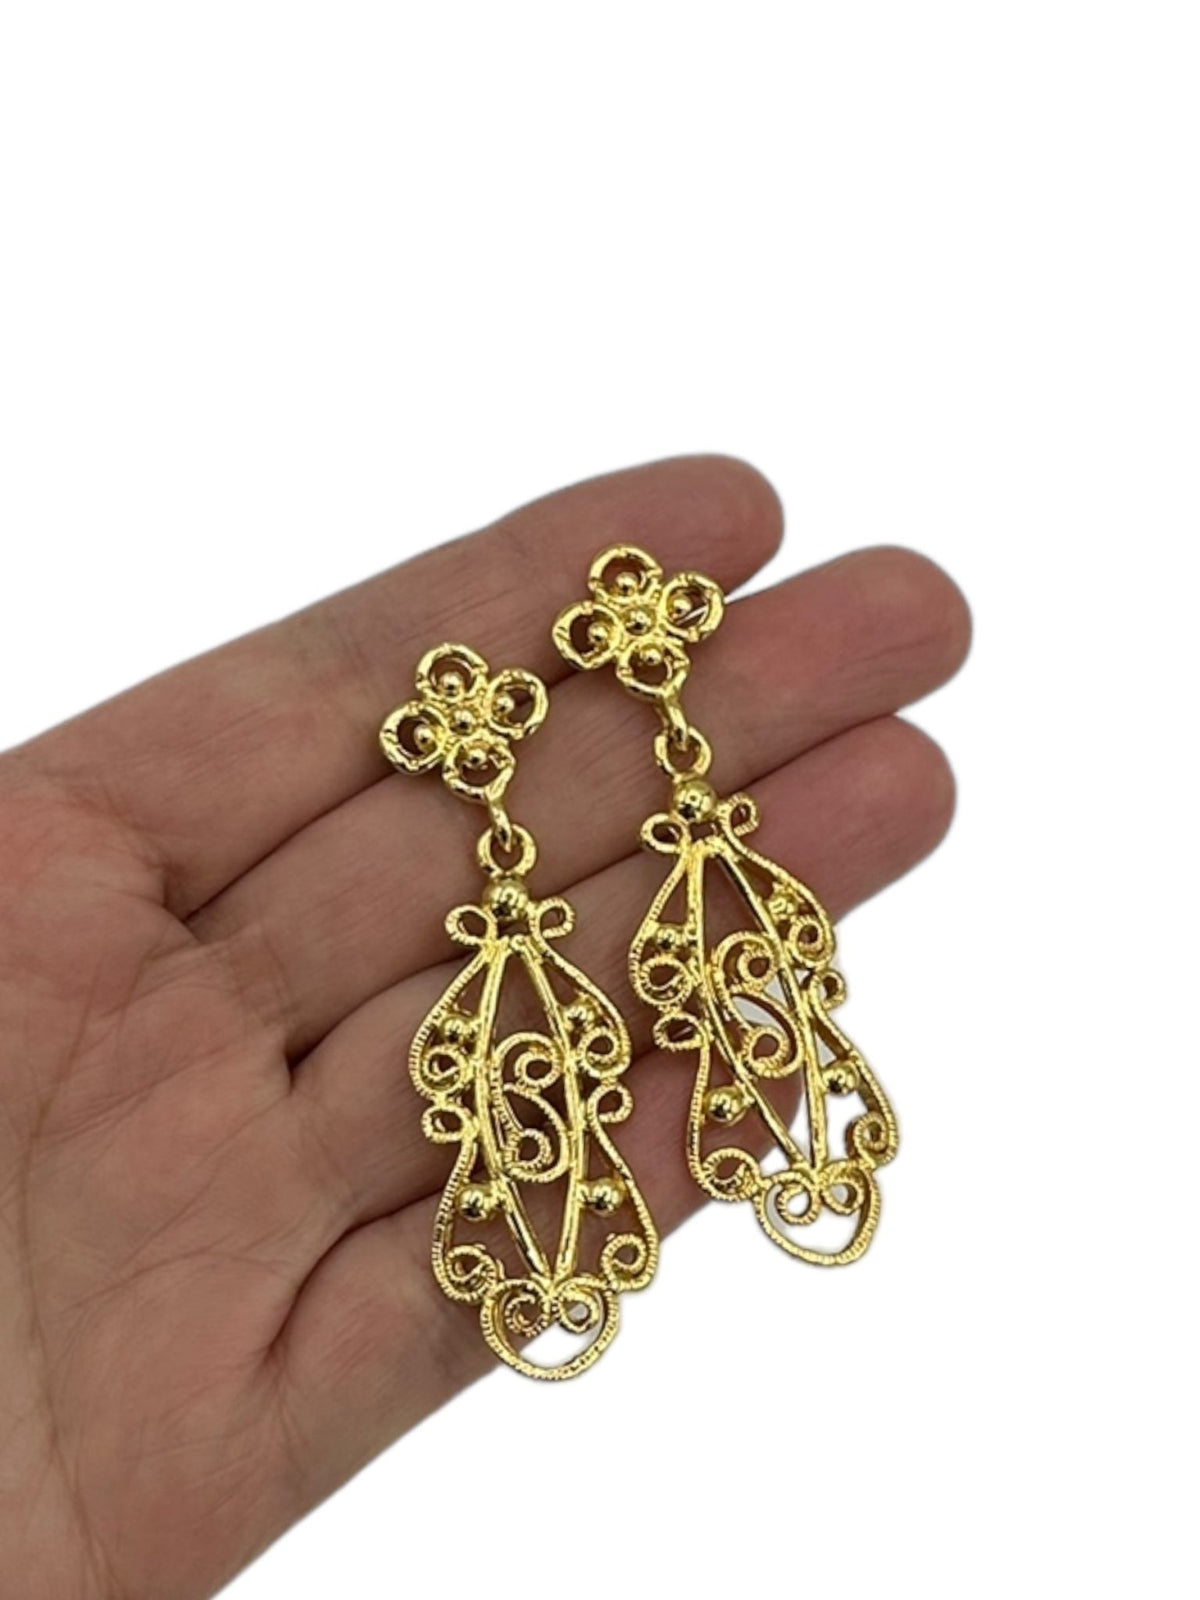 Gold Victorian Revival Filigree Dangle Vintage Pierced Earrings - 24 Wishes Vintage Jewelry